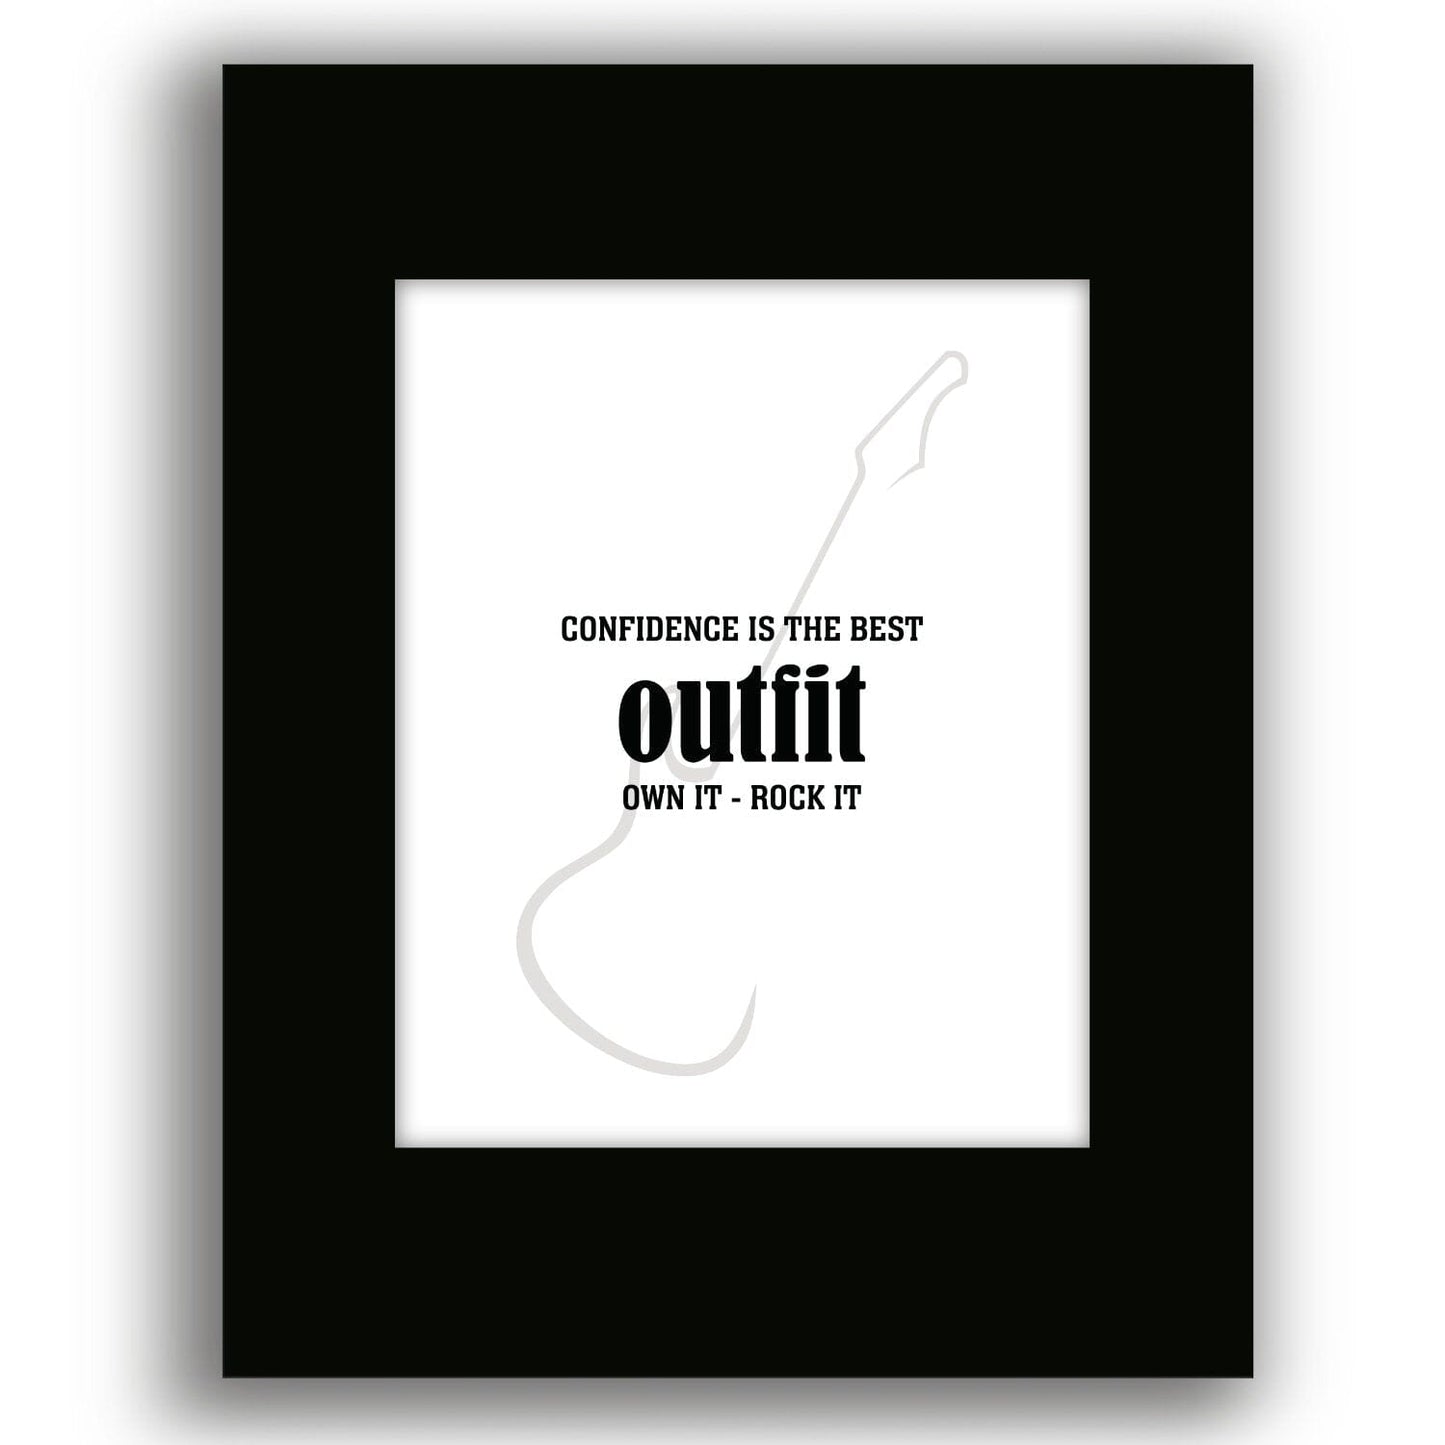 Wise & Witty Art - Confidence is the Best Outfit Own It Rock It Wise and Wiseass Quotes Song Lyrics Art 8x10 Black Matted Print 